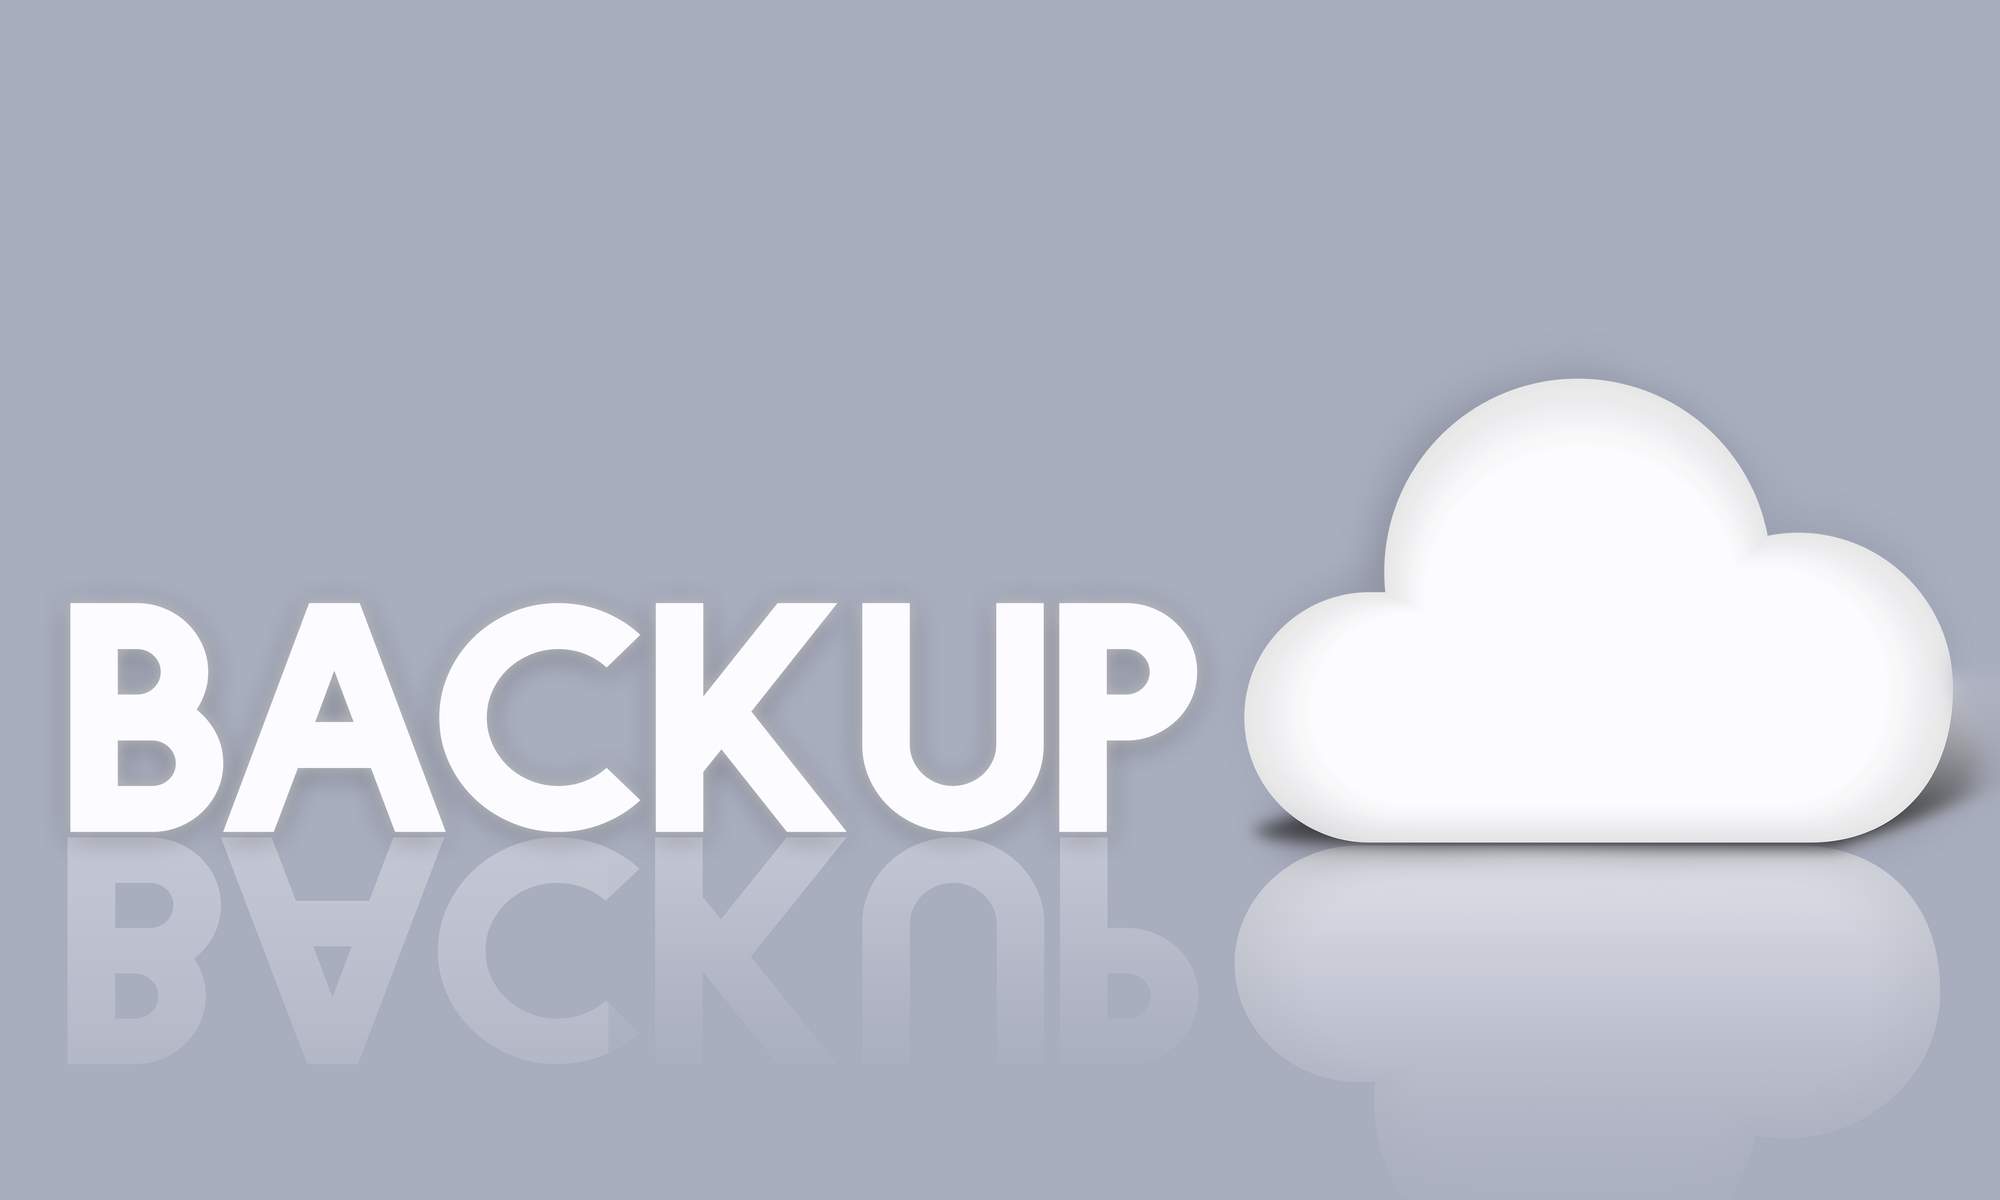 Cloud backups concept in gray and white